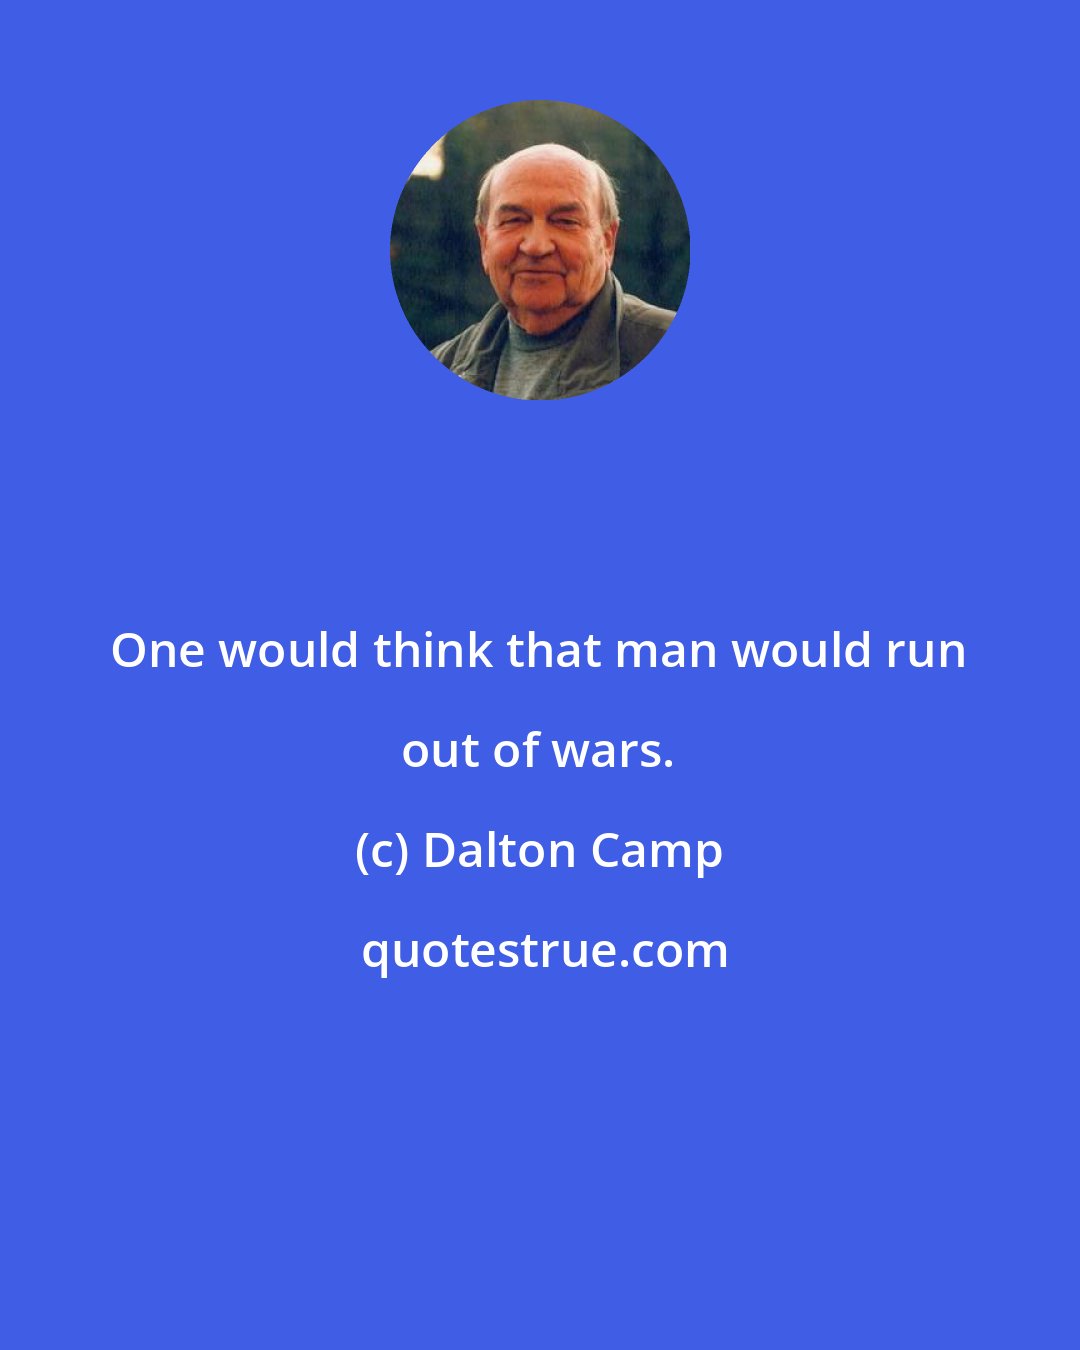 Dalton Camp: One would think that man would run out of wars.